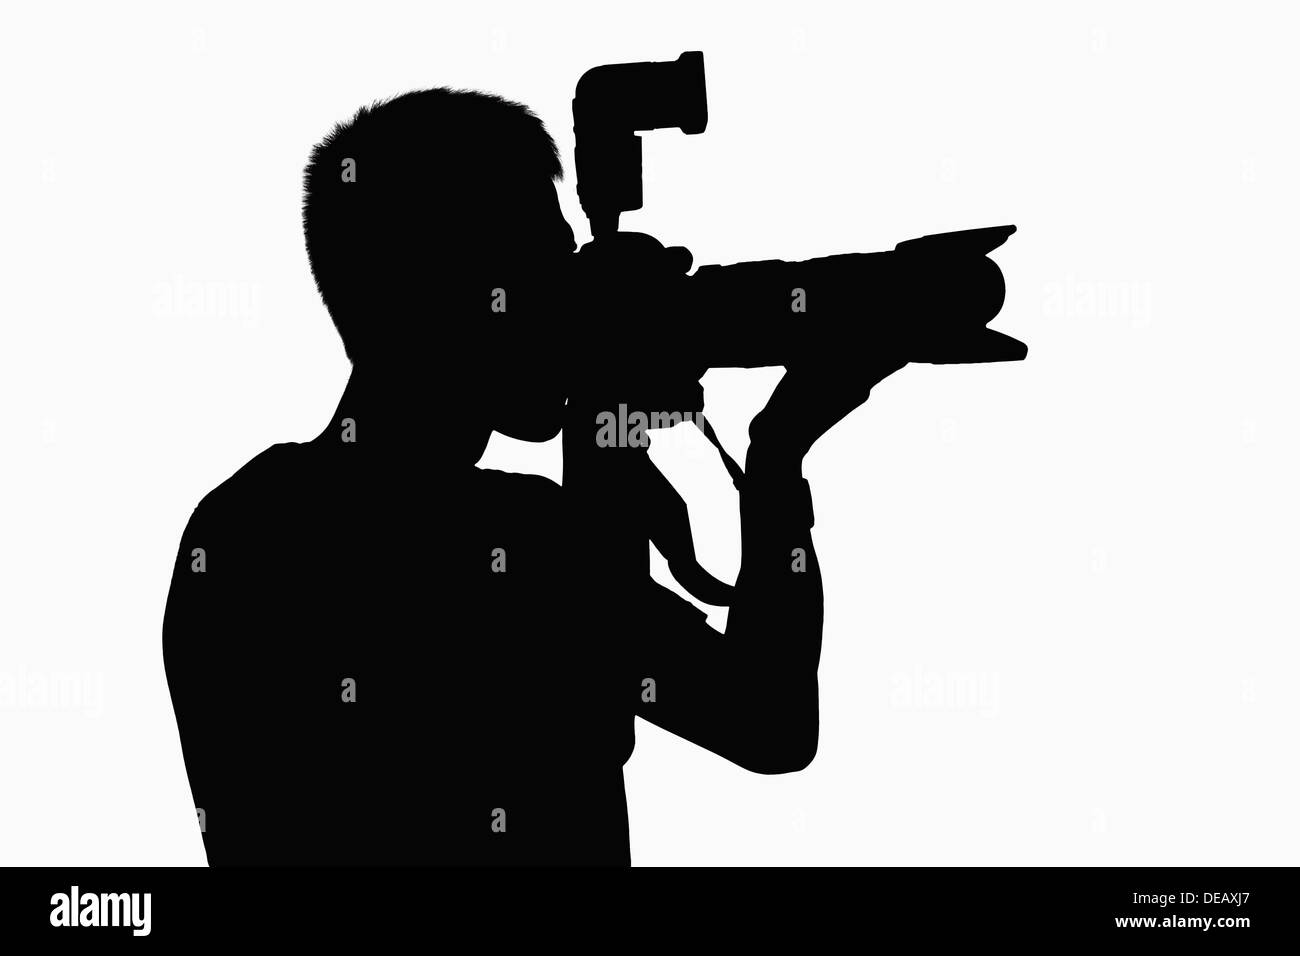 Silhouette of man holding camera. Banque D'Images